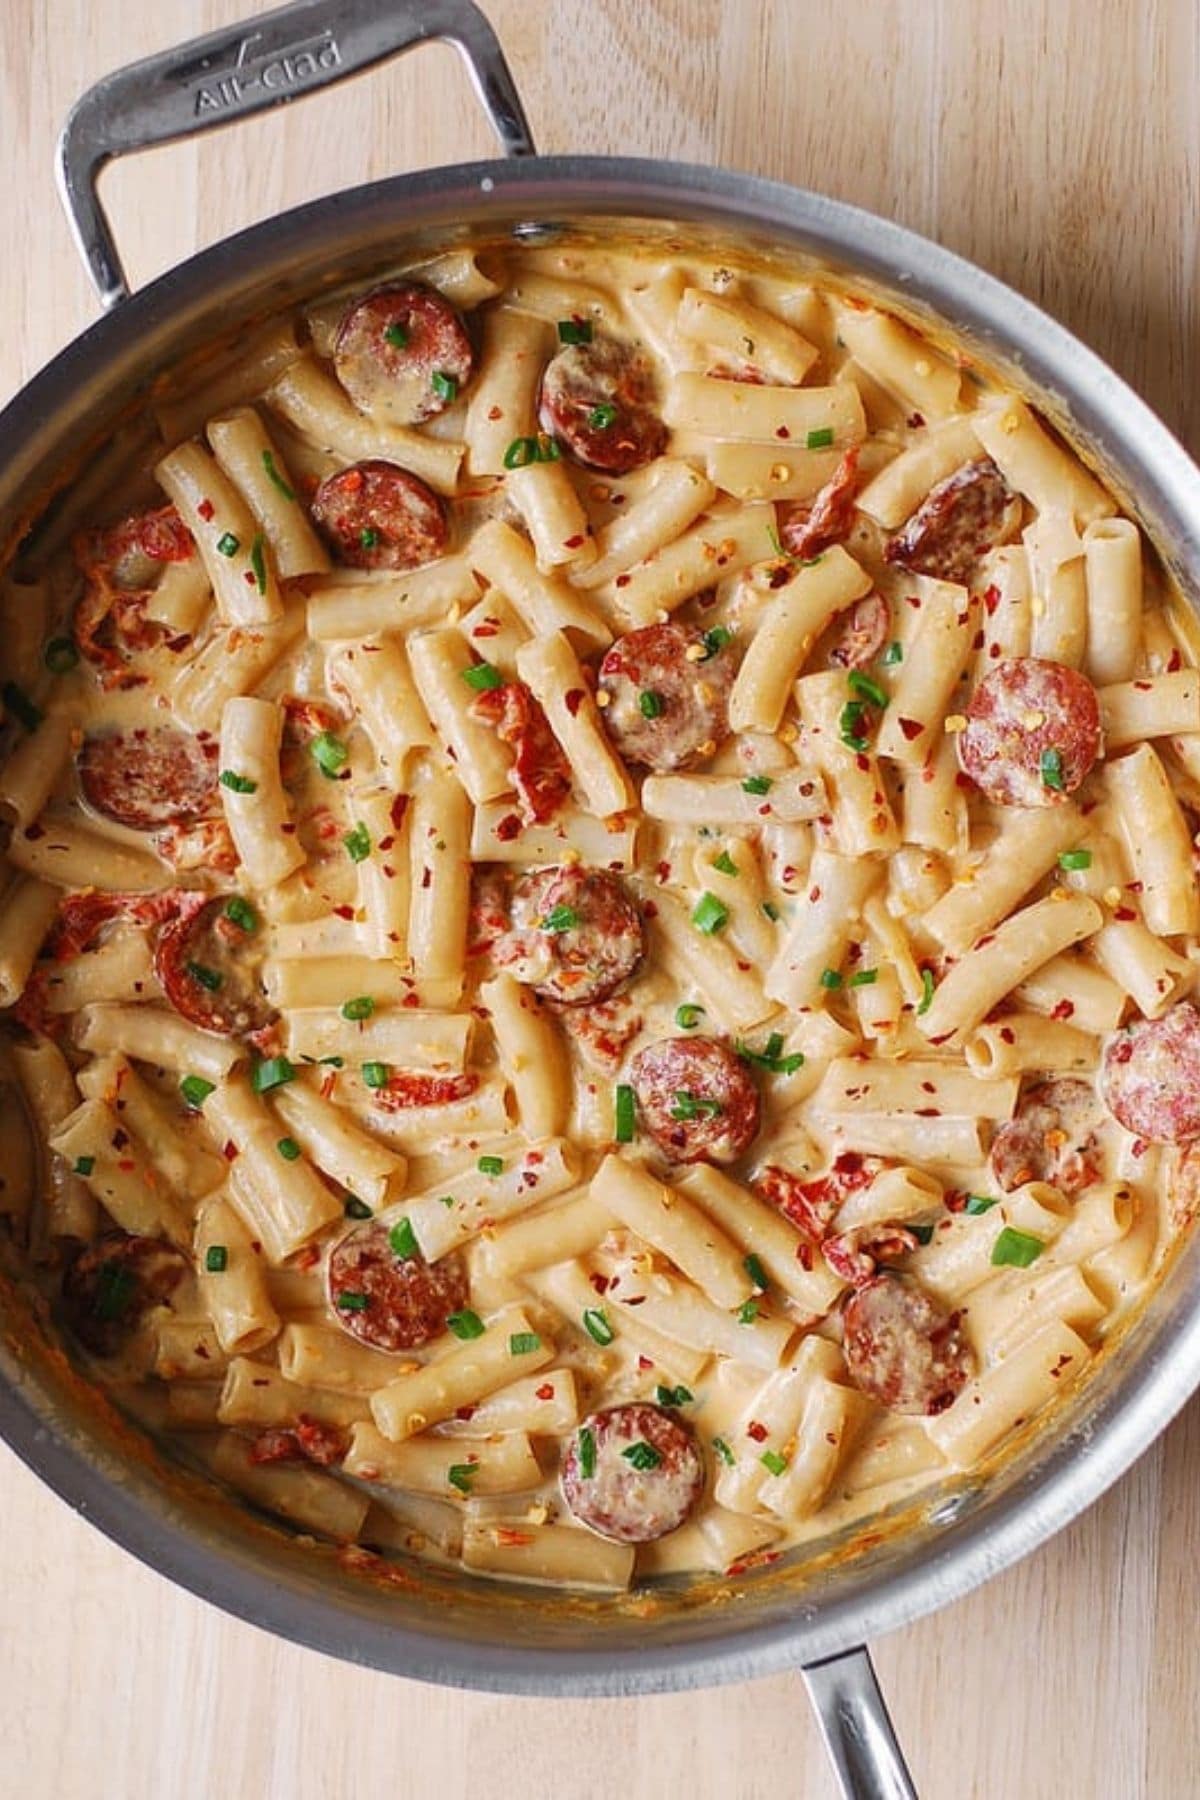 Spiral pasta in large skillet with creamy sauce